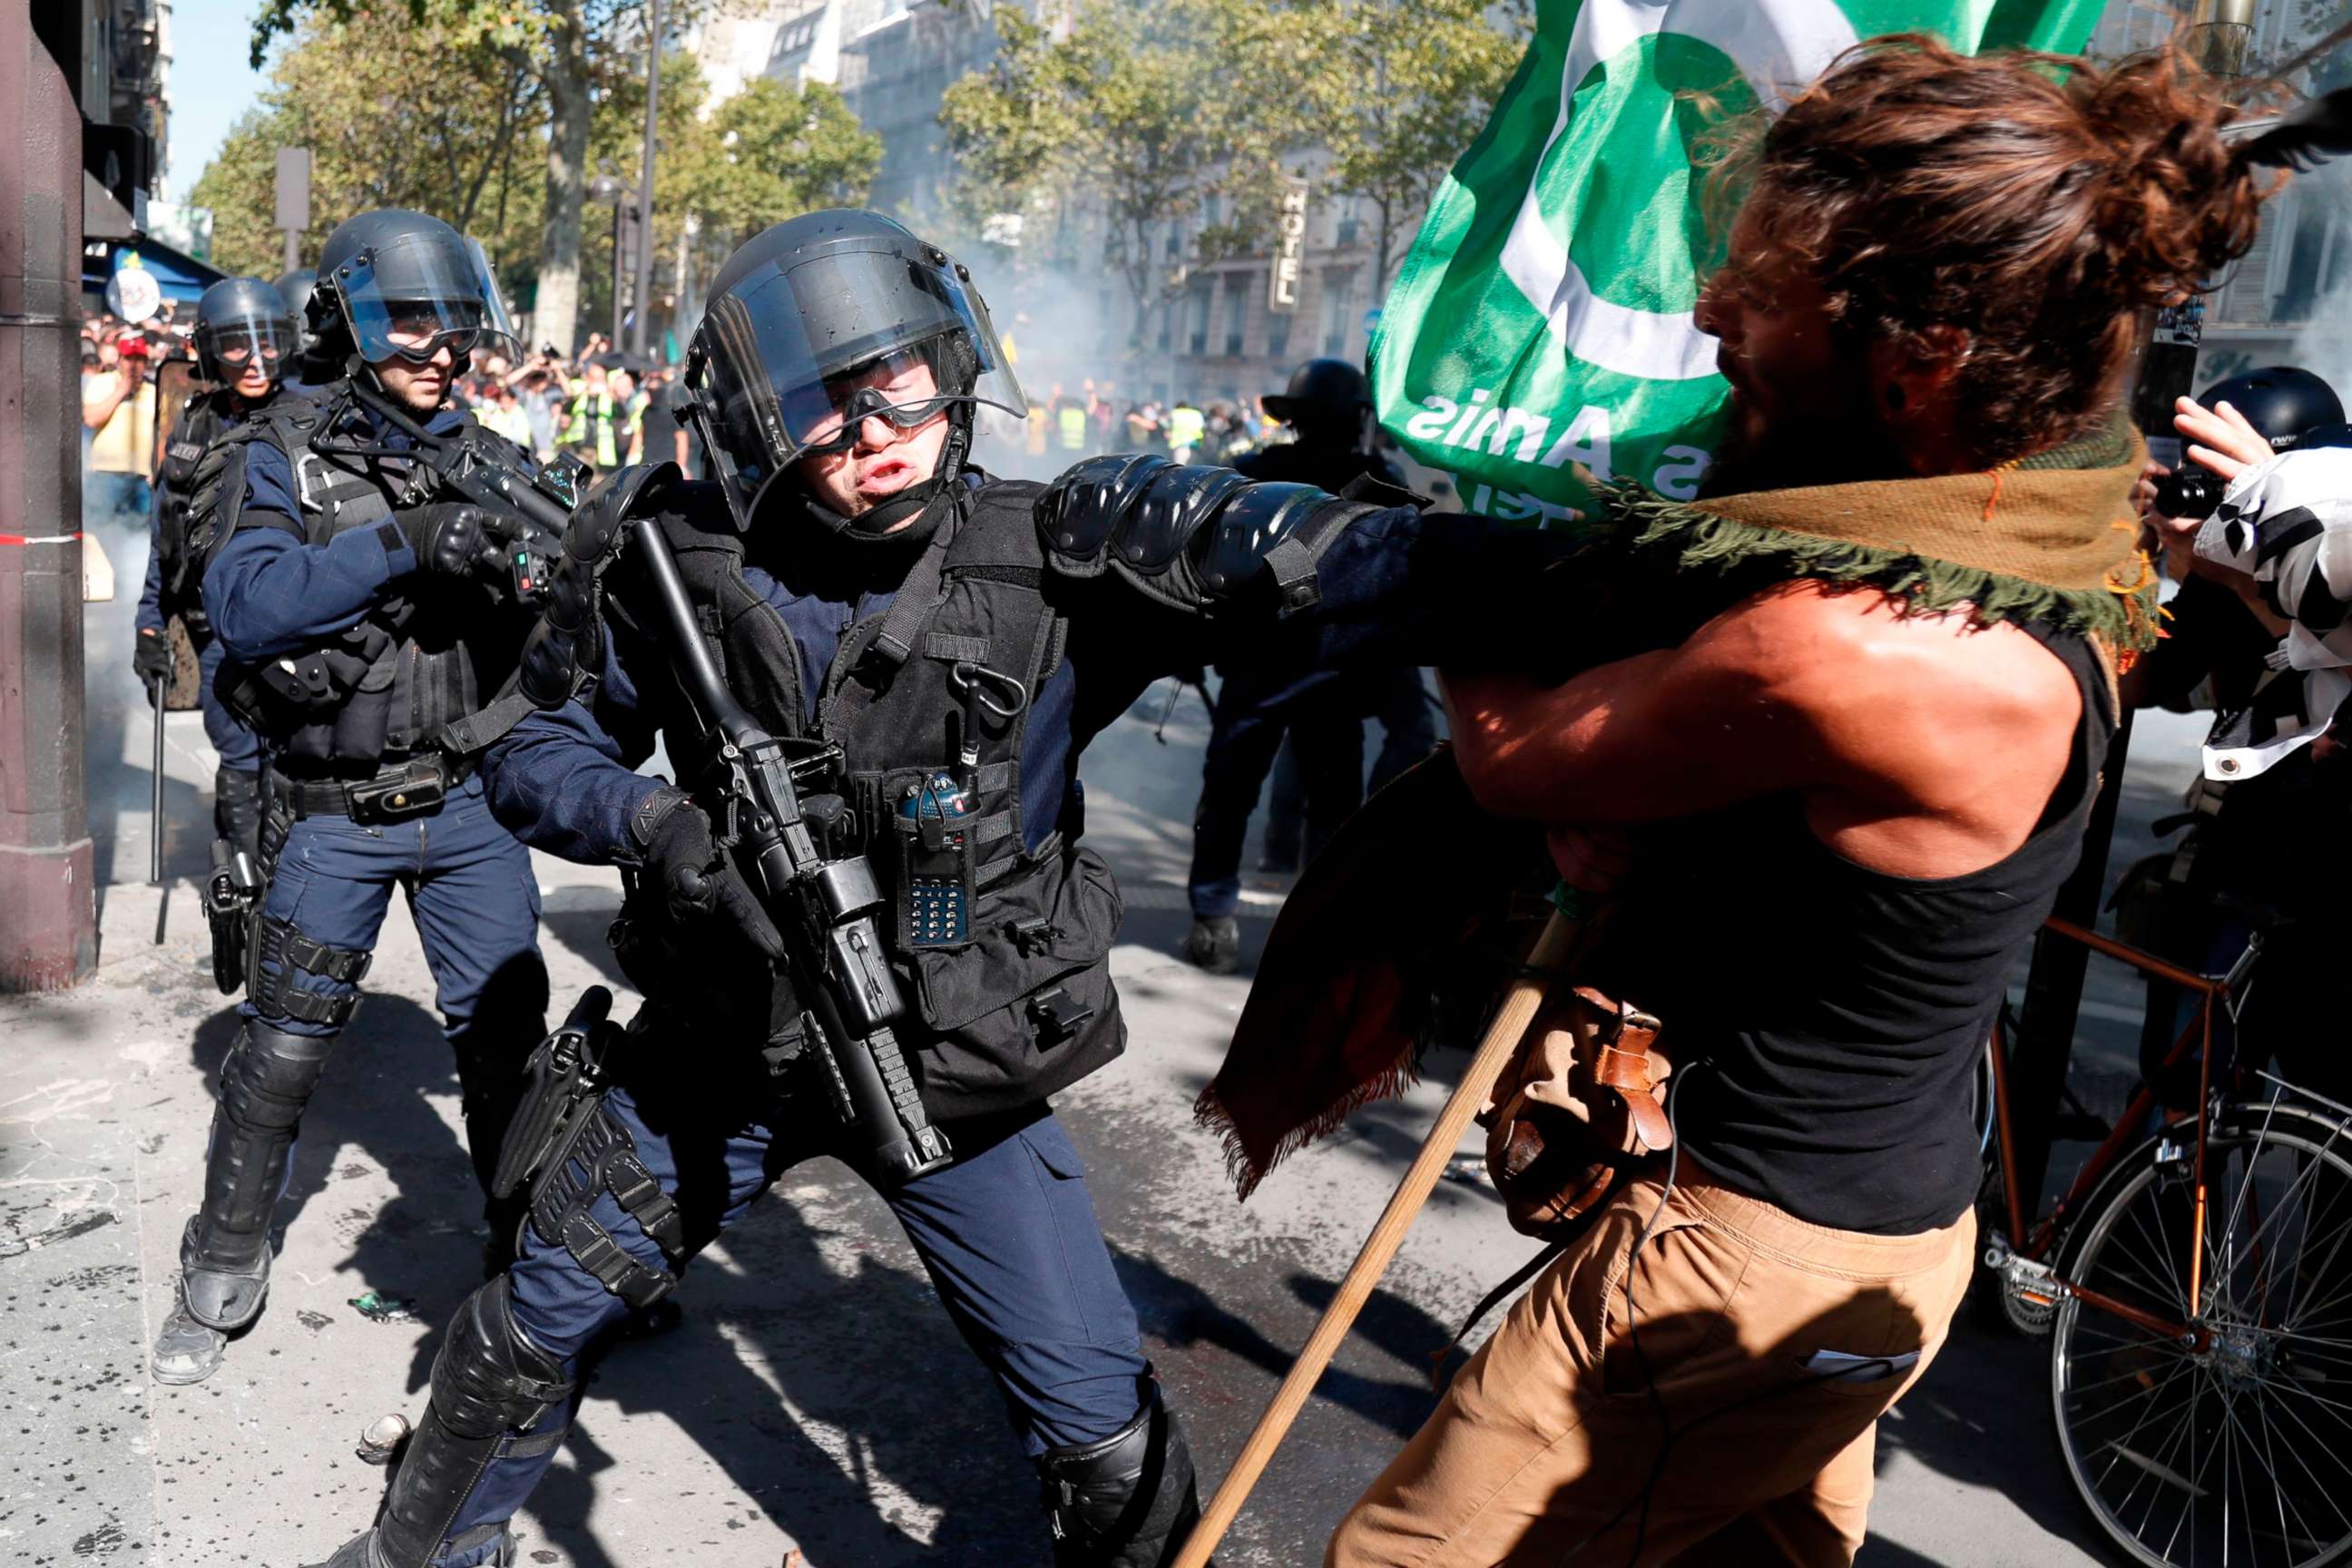 PHOTO: A demonstrator clashes with riot policemen during the Climate Change protest, on Sept. 21, 2019 in Paris.